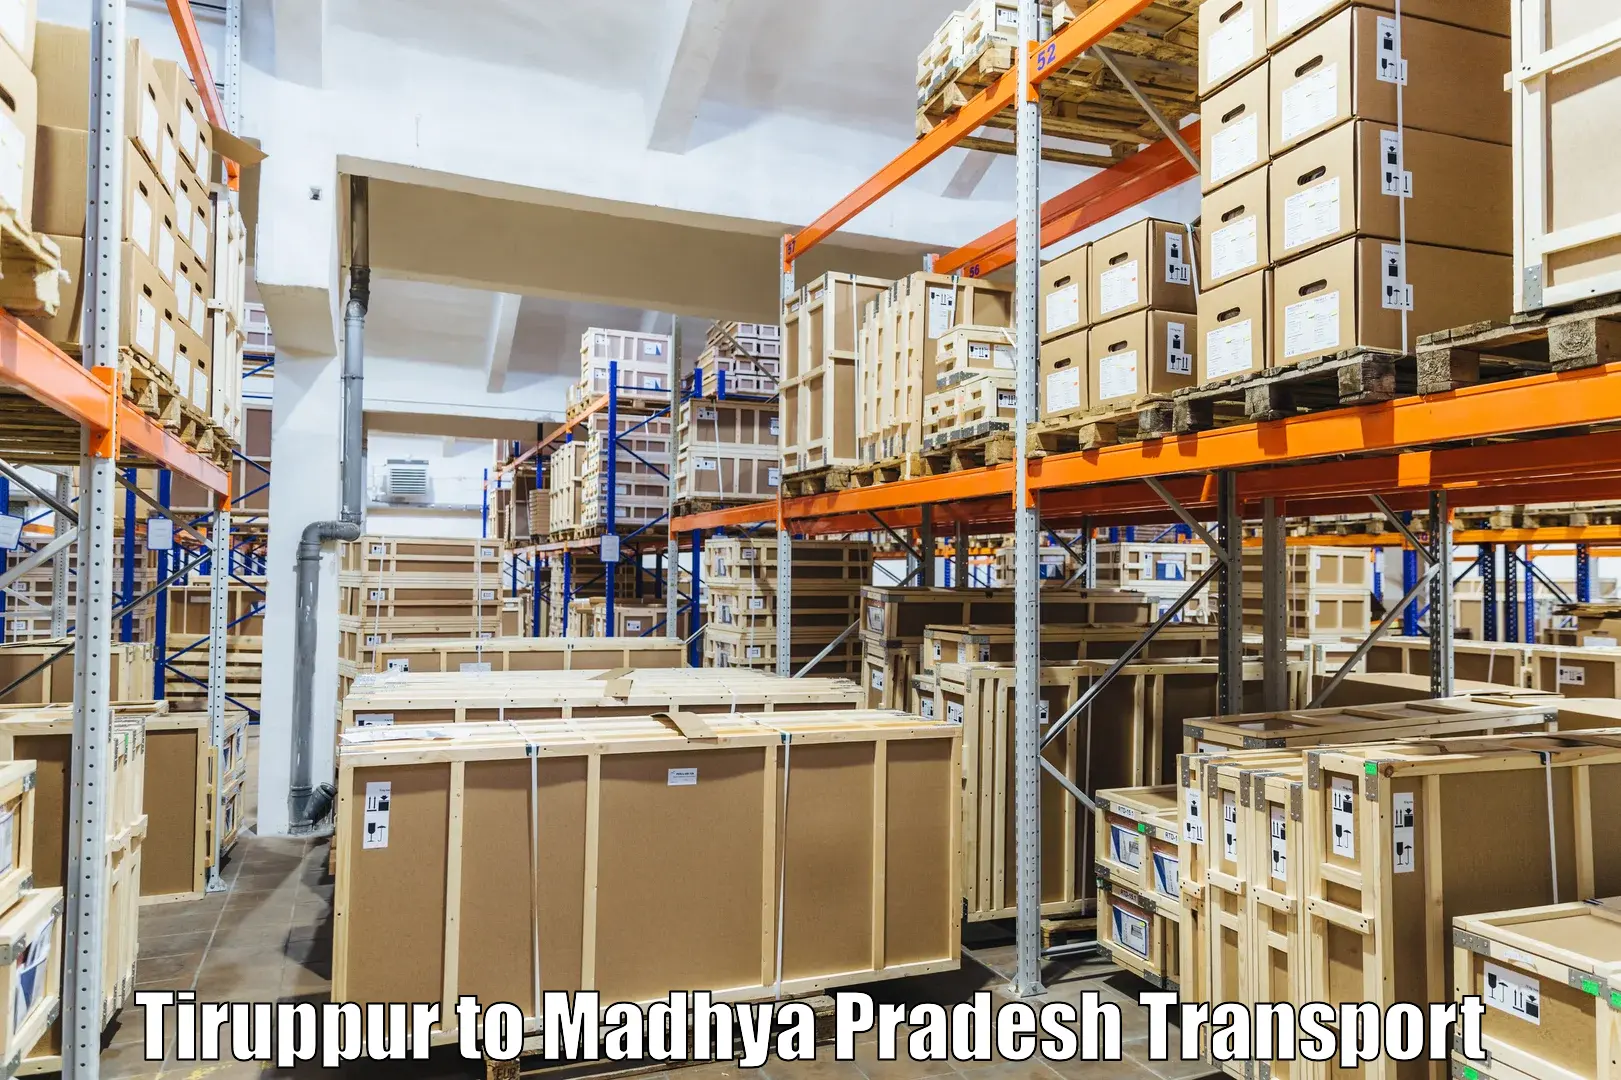 Express transport services Tiruppur to Gwalior